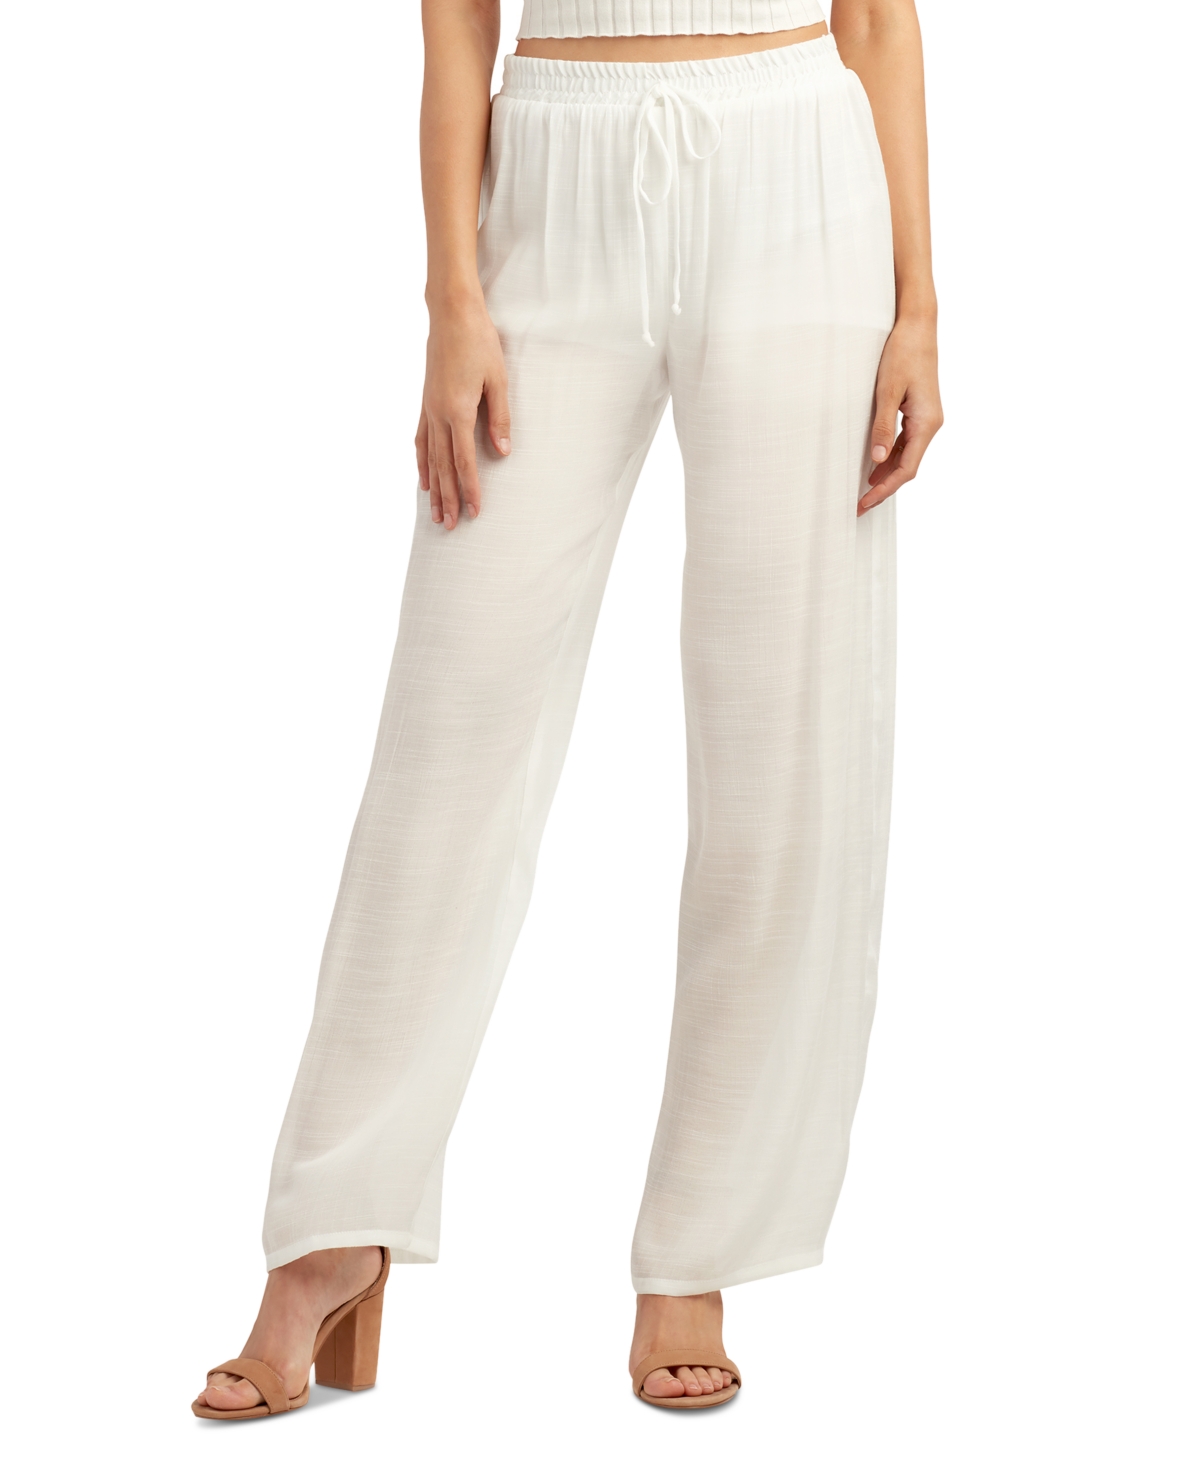 Juniors' Mid-Rise Pull-On Wide-Leg Pants - Off White